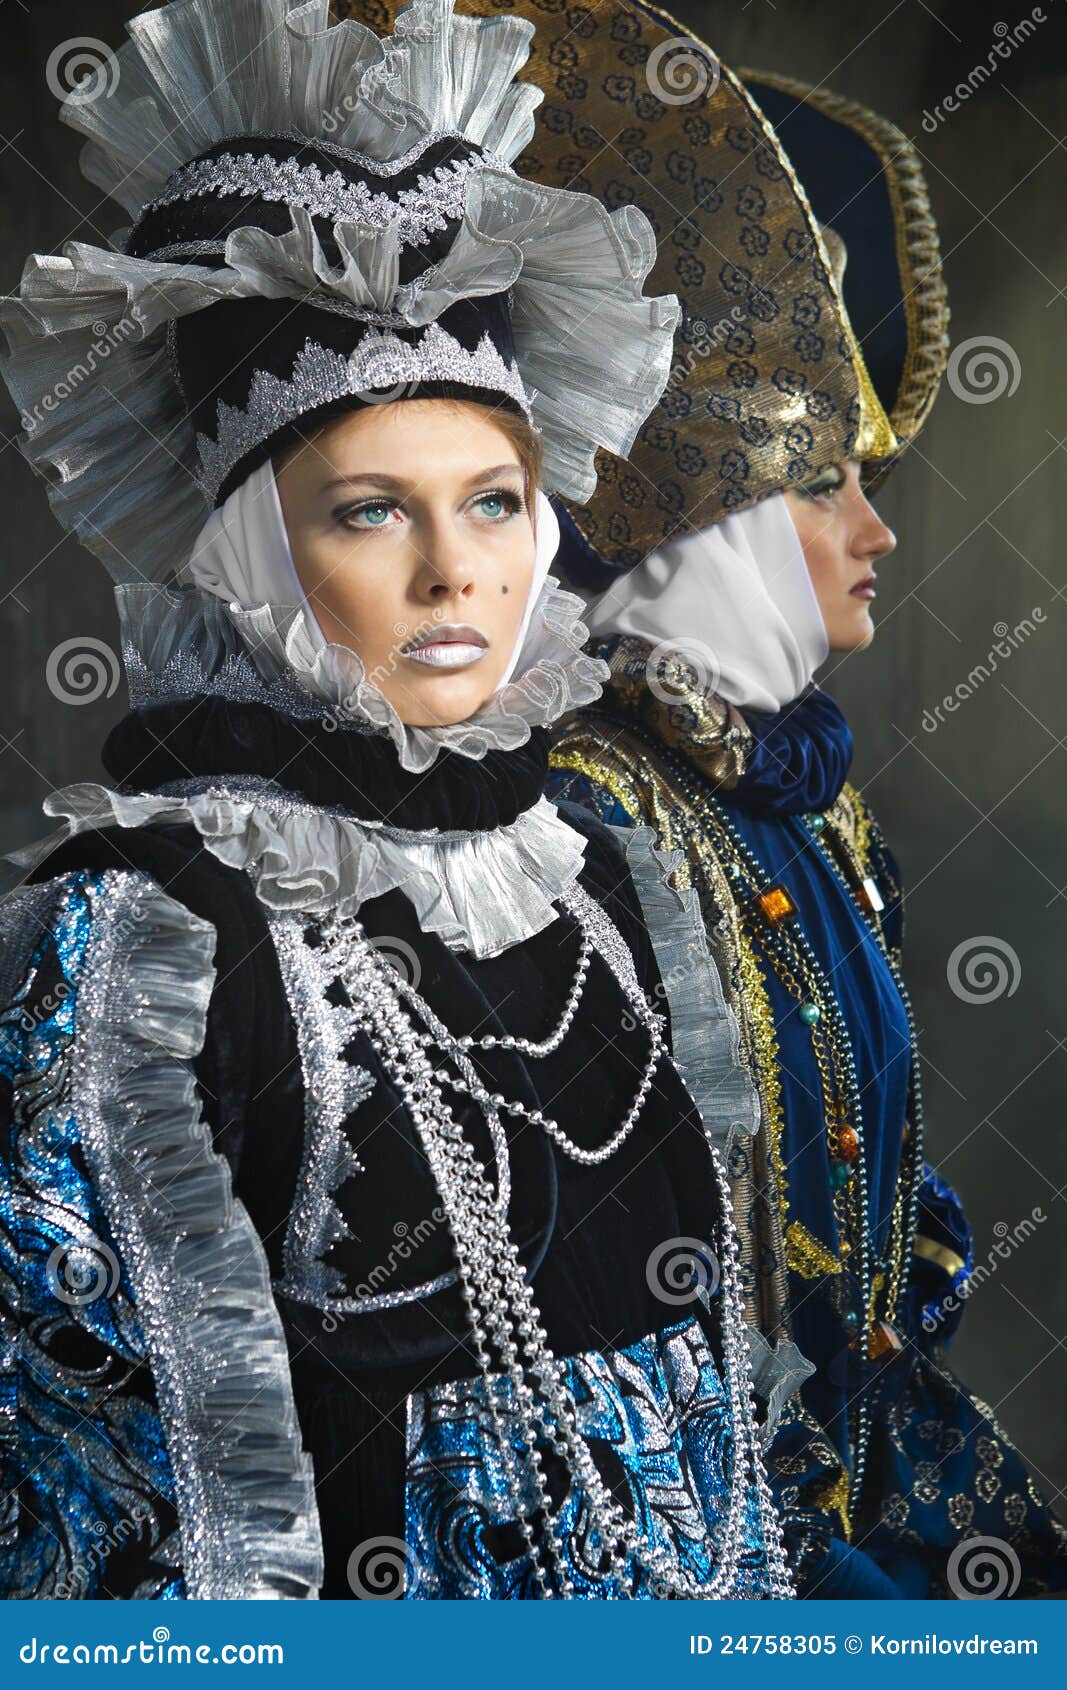 Women in medieval costume stock image. Image of attractive - 24758305